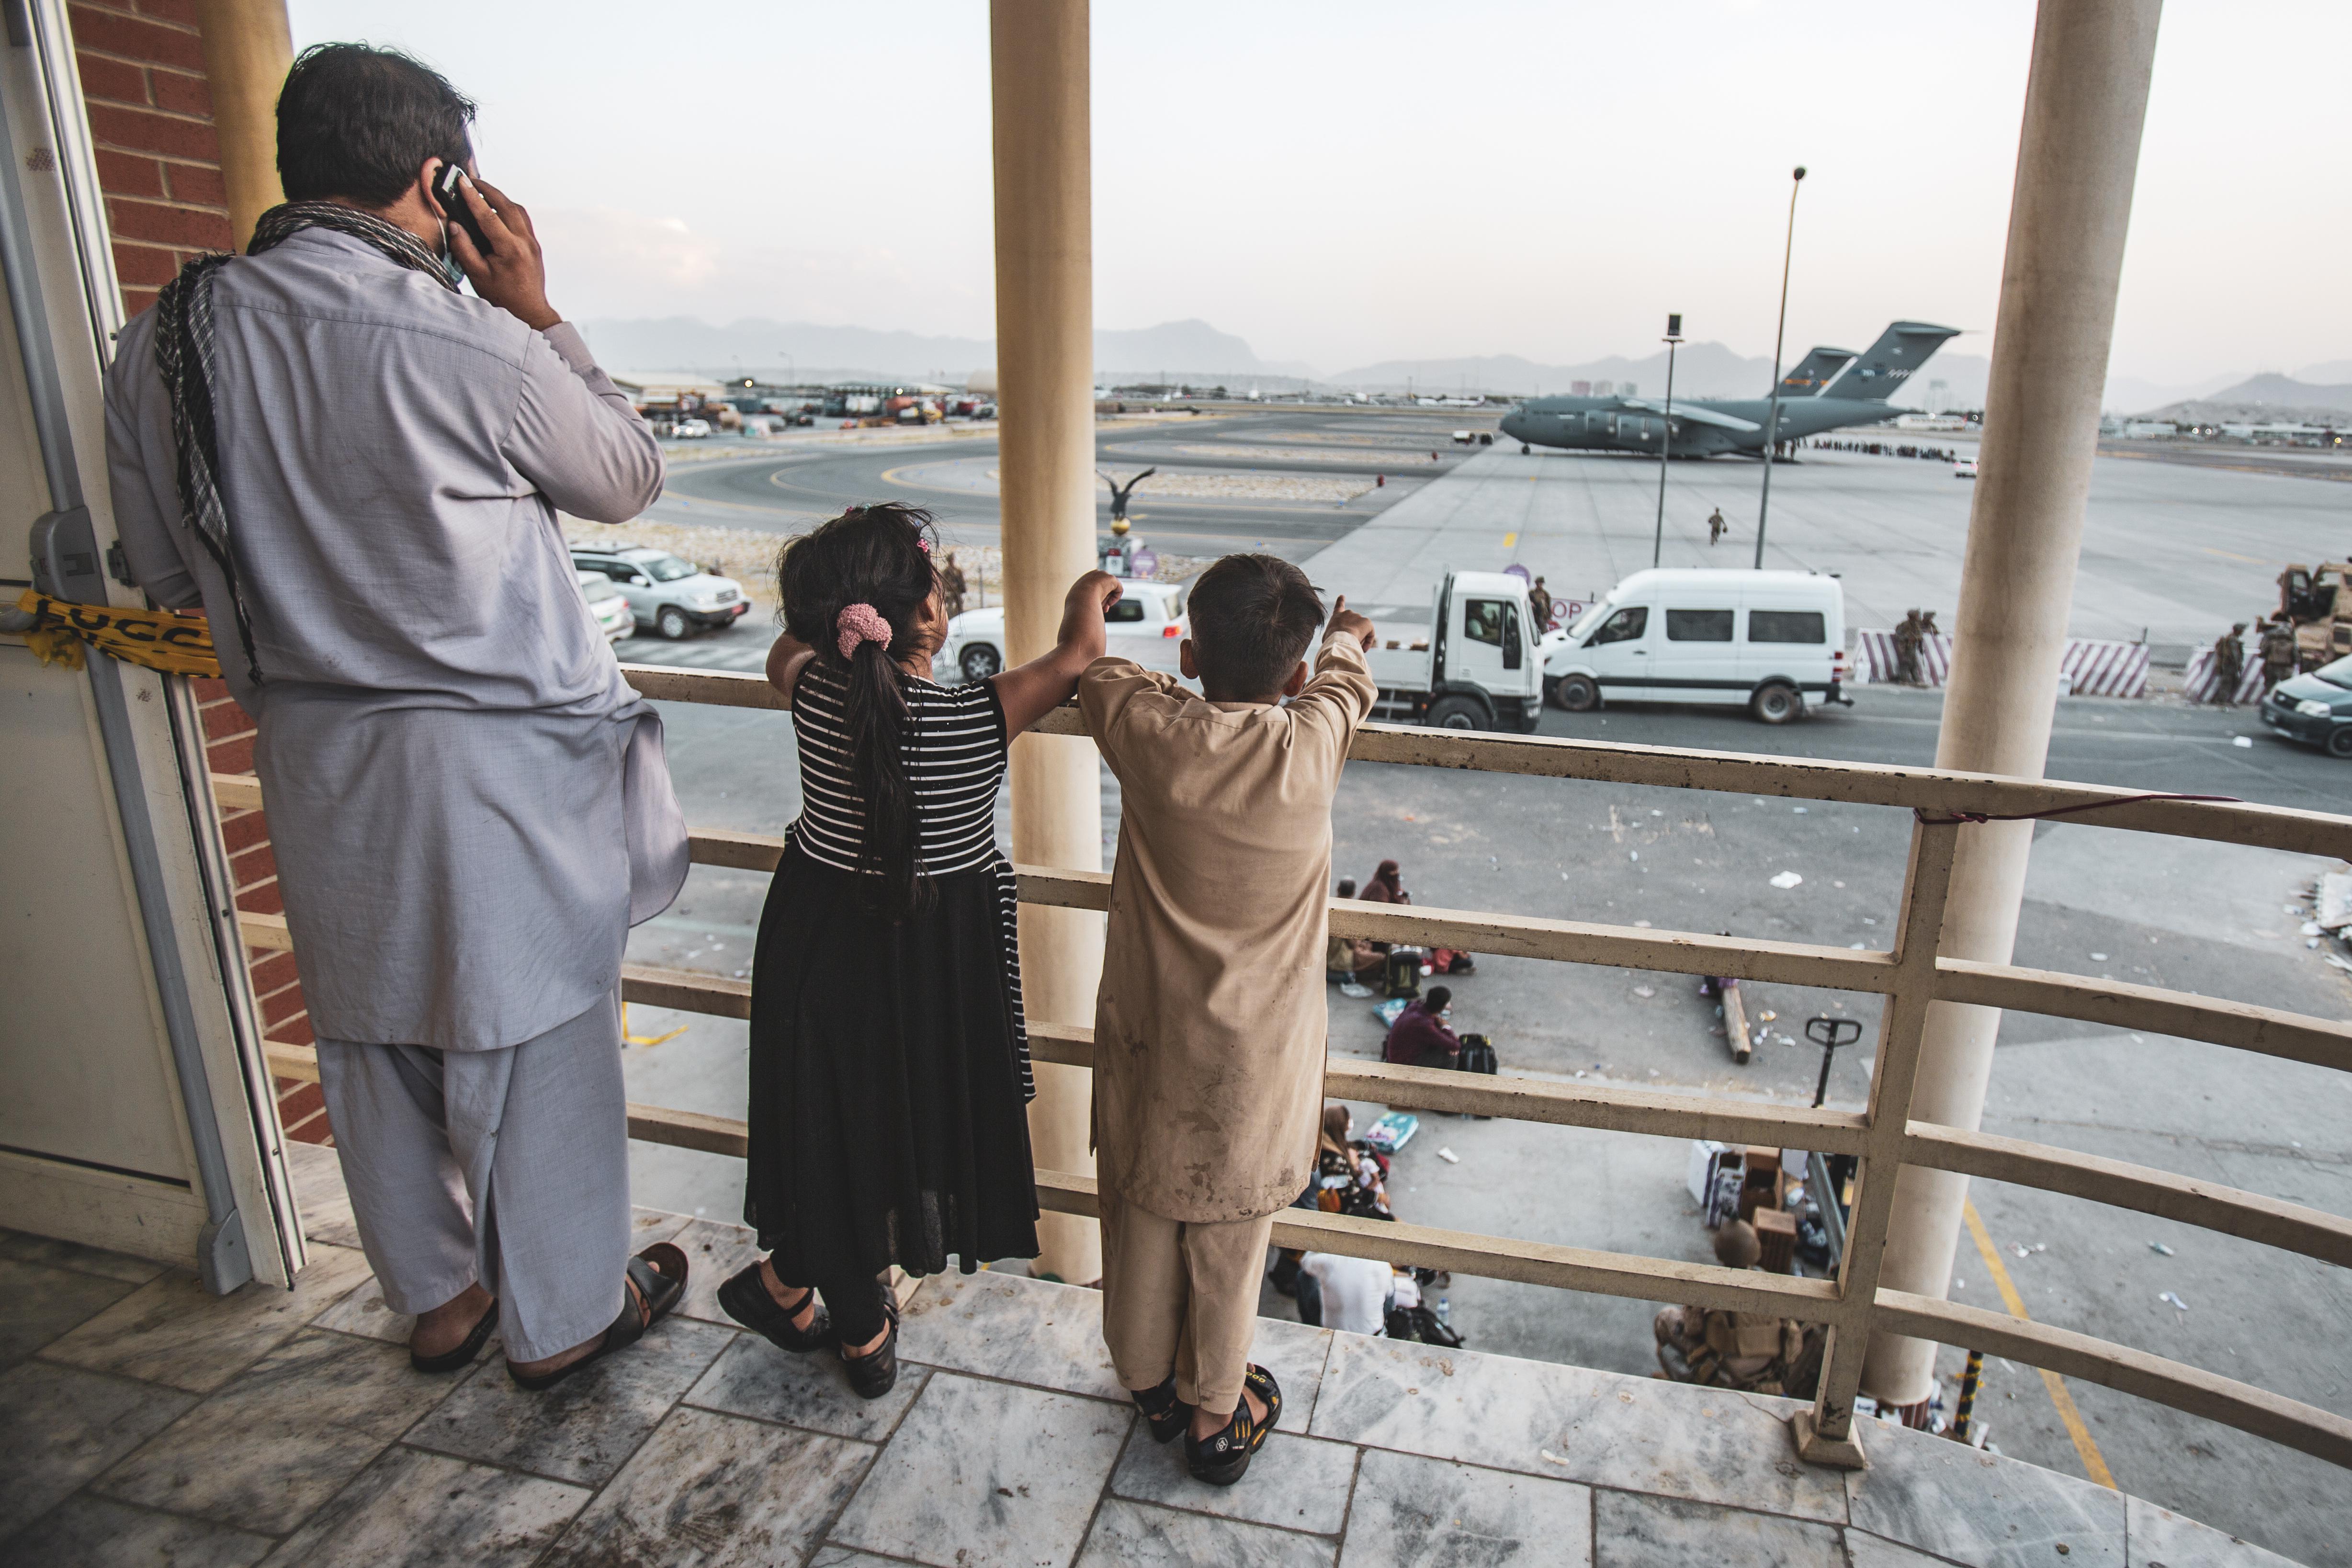 An Afghan family watches the evacuation underway at the Kabul airport.